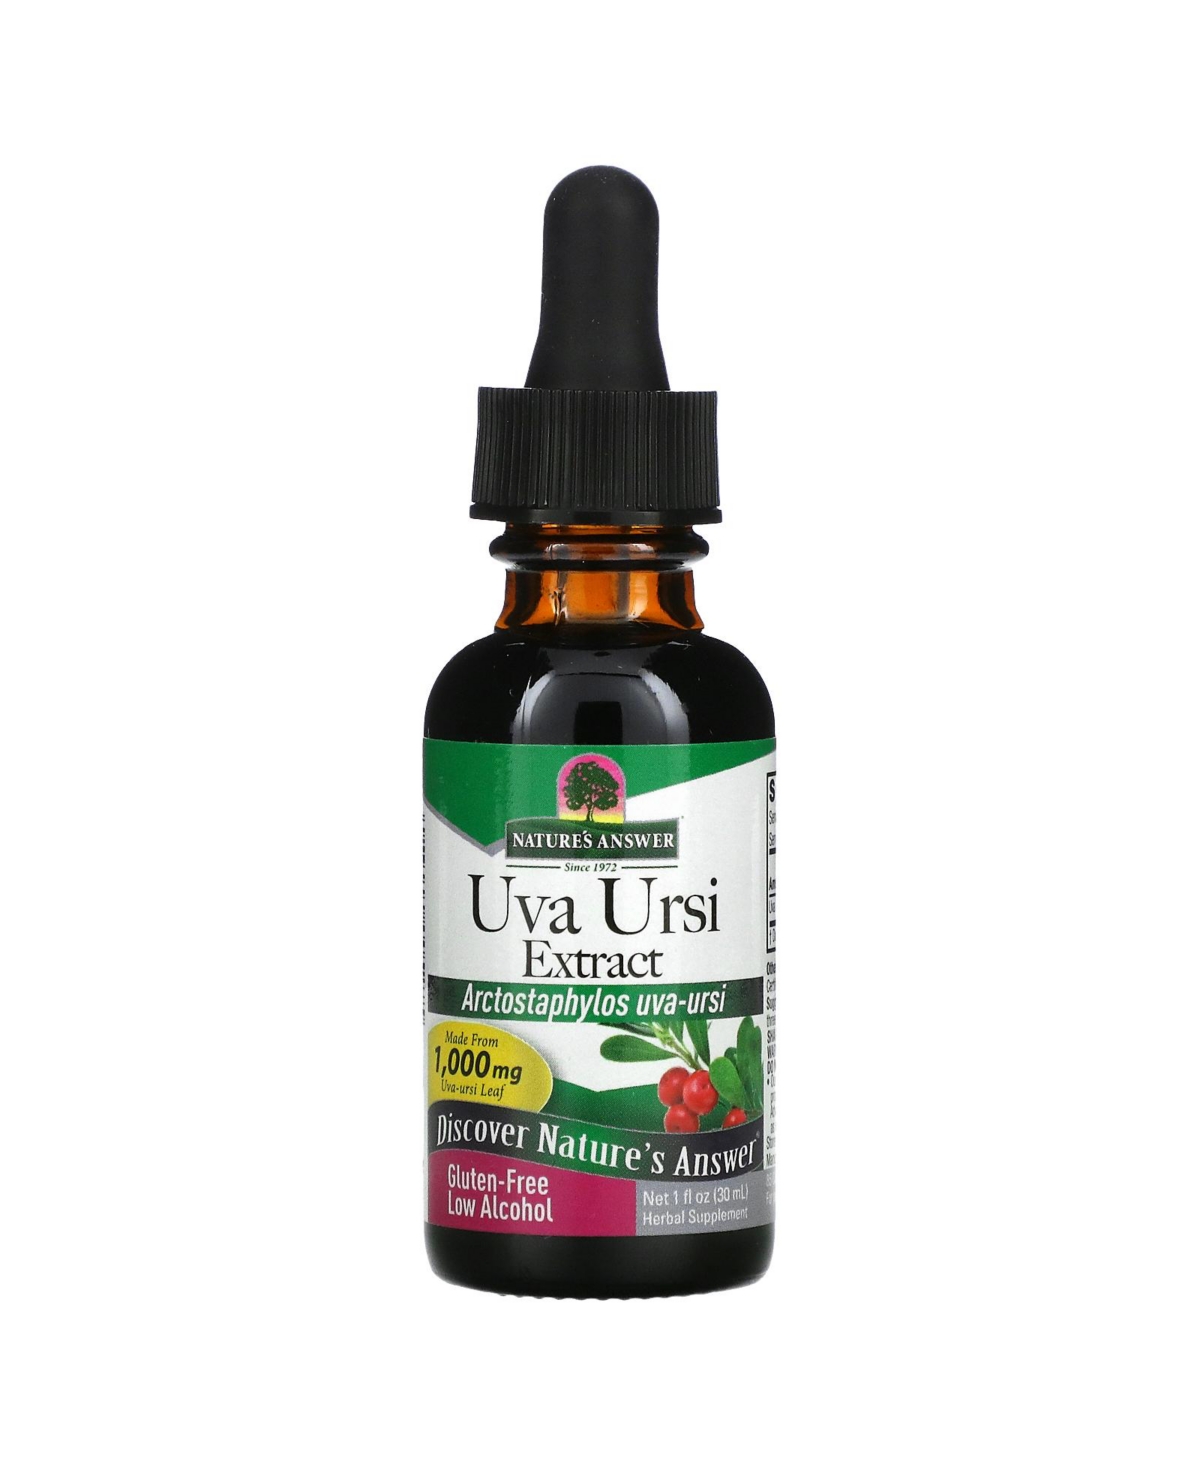 Uva Ursi Extract Low Alcohol 1 000 mg - 1 fl oz (30 ml) - Assorted Pre-pack (See Table